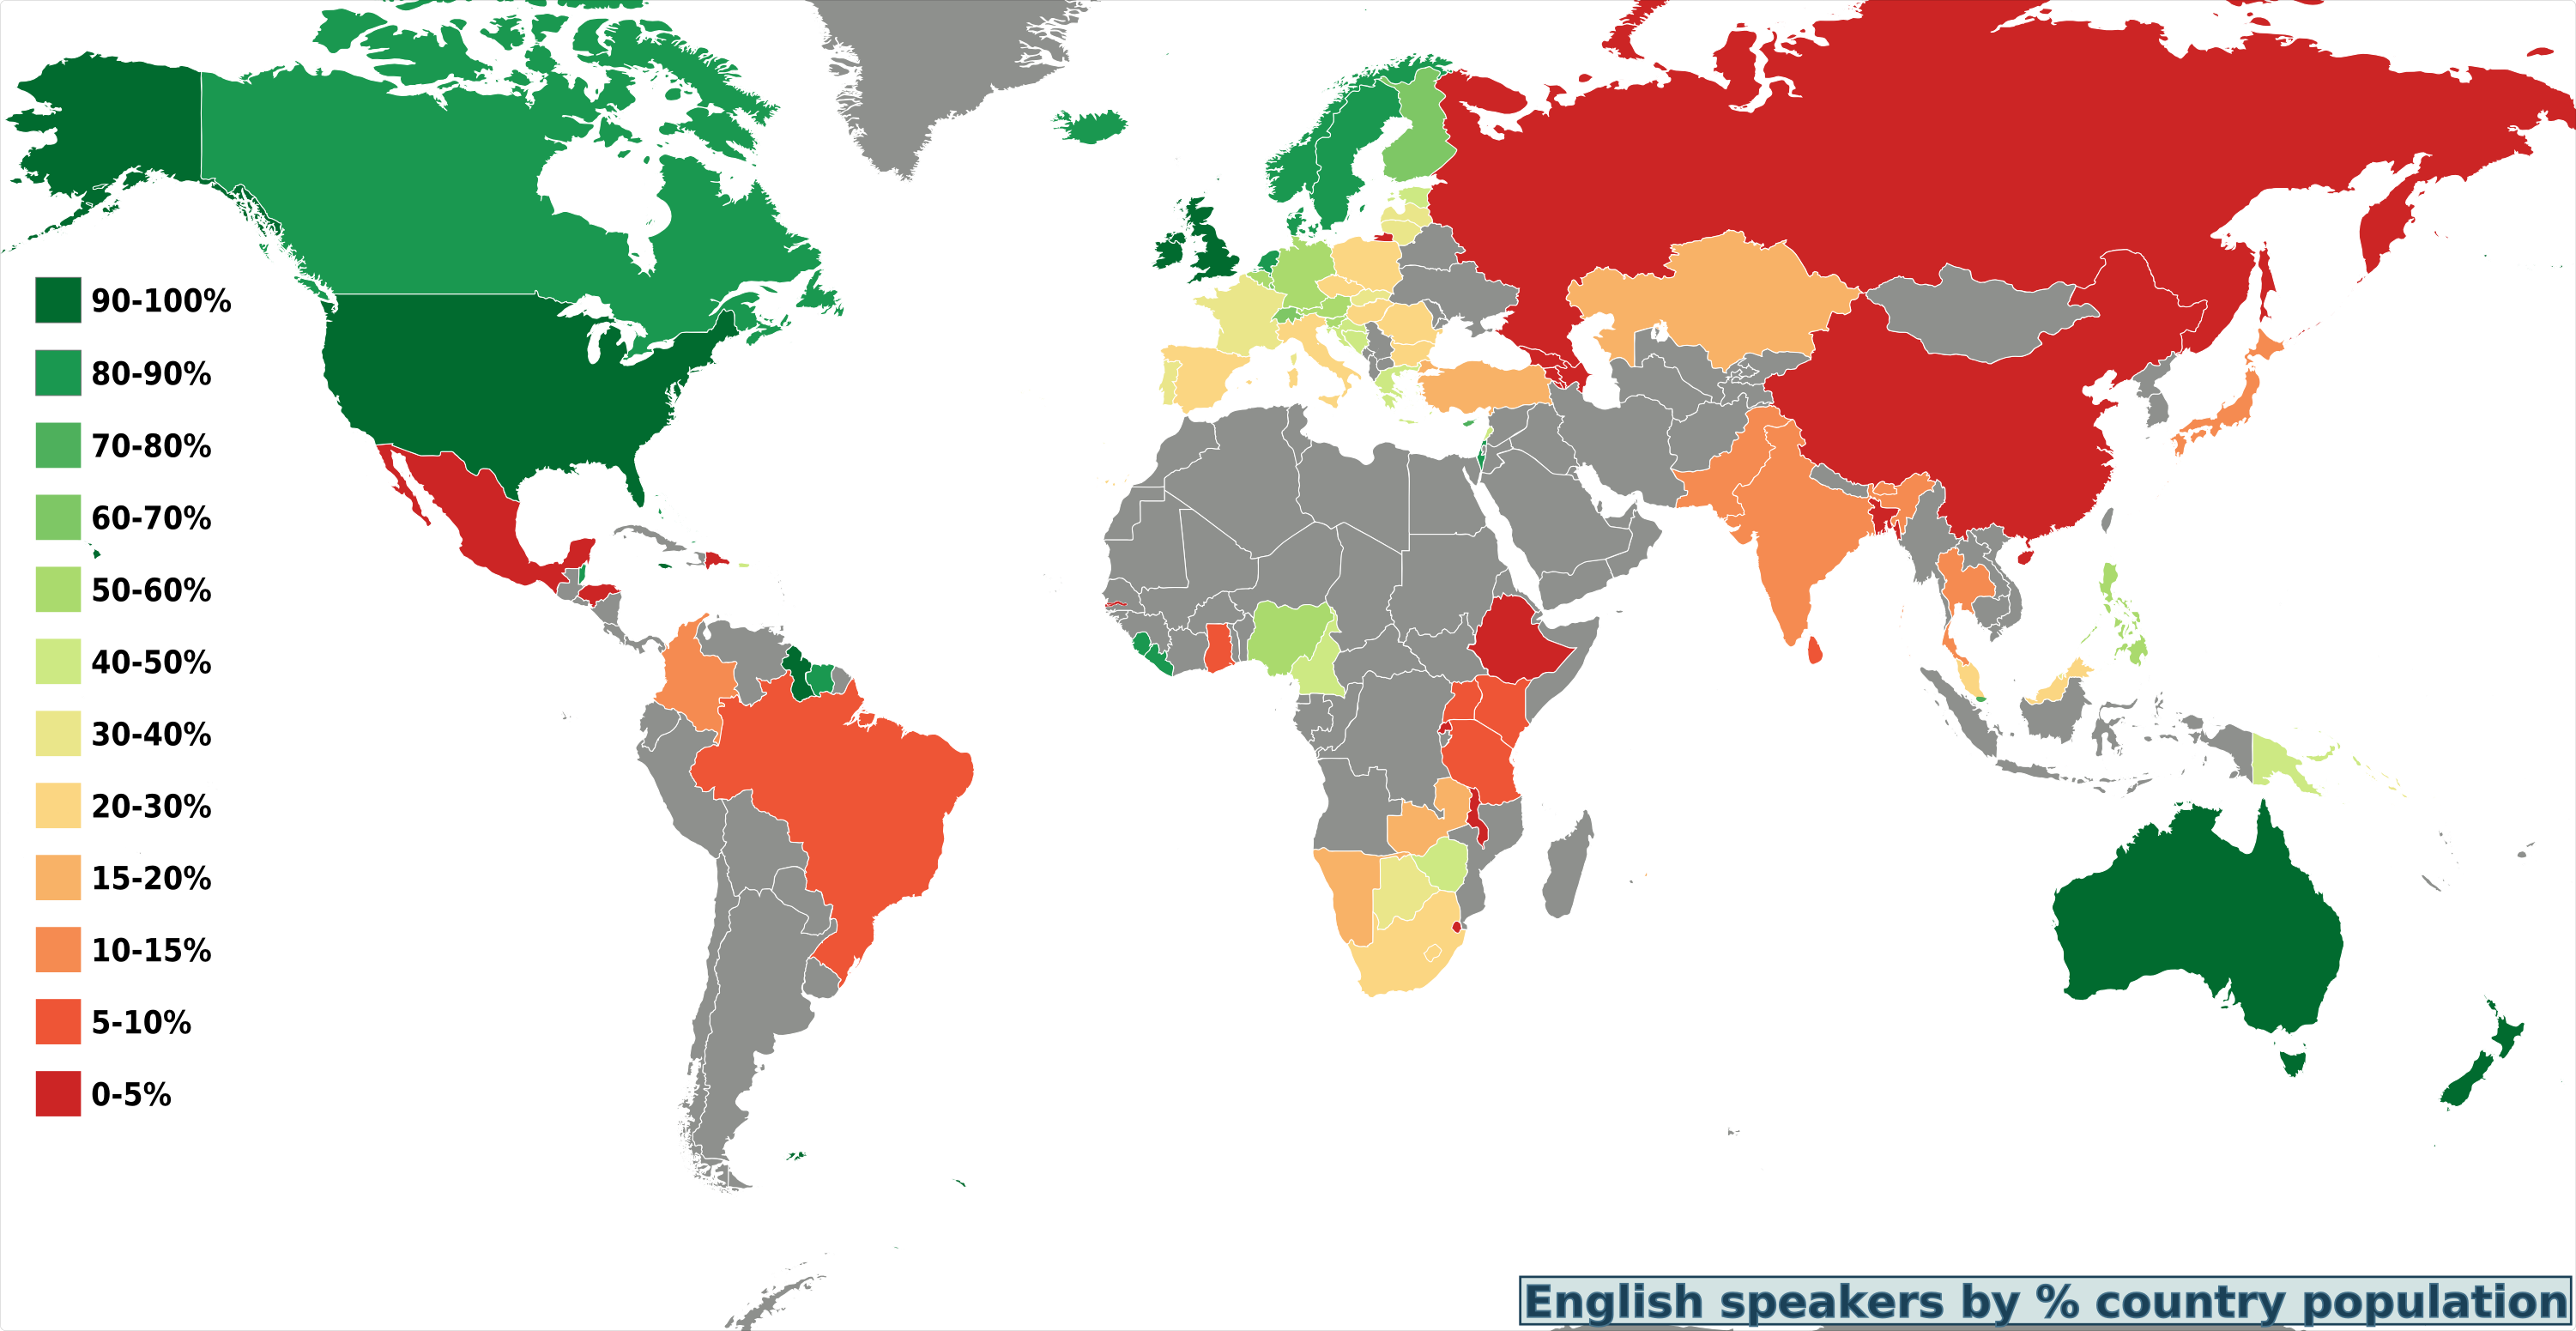 World Map Percentage English Speakers by Country (by Felipe Menegaz, Peter Fitzgerald on Wikimedia under 4.0)